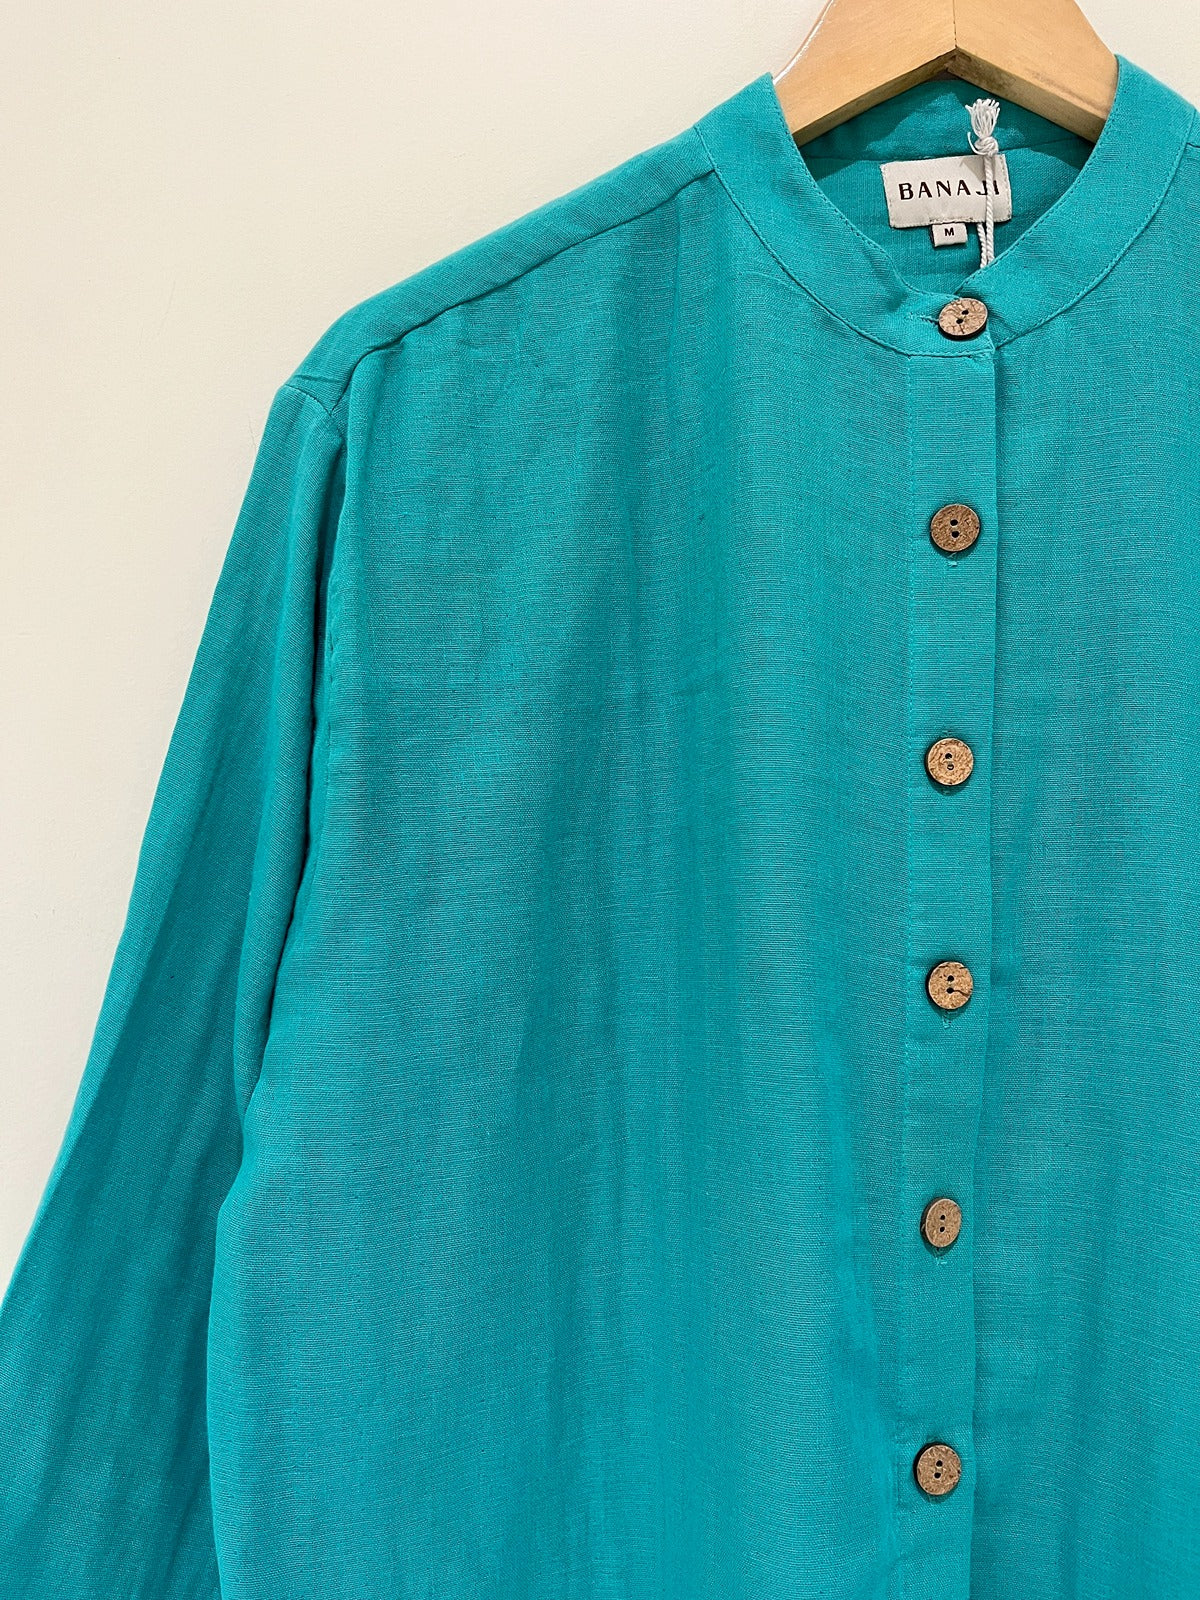 Teal Cotton Shirt Style Top